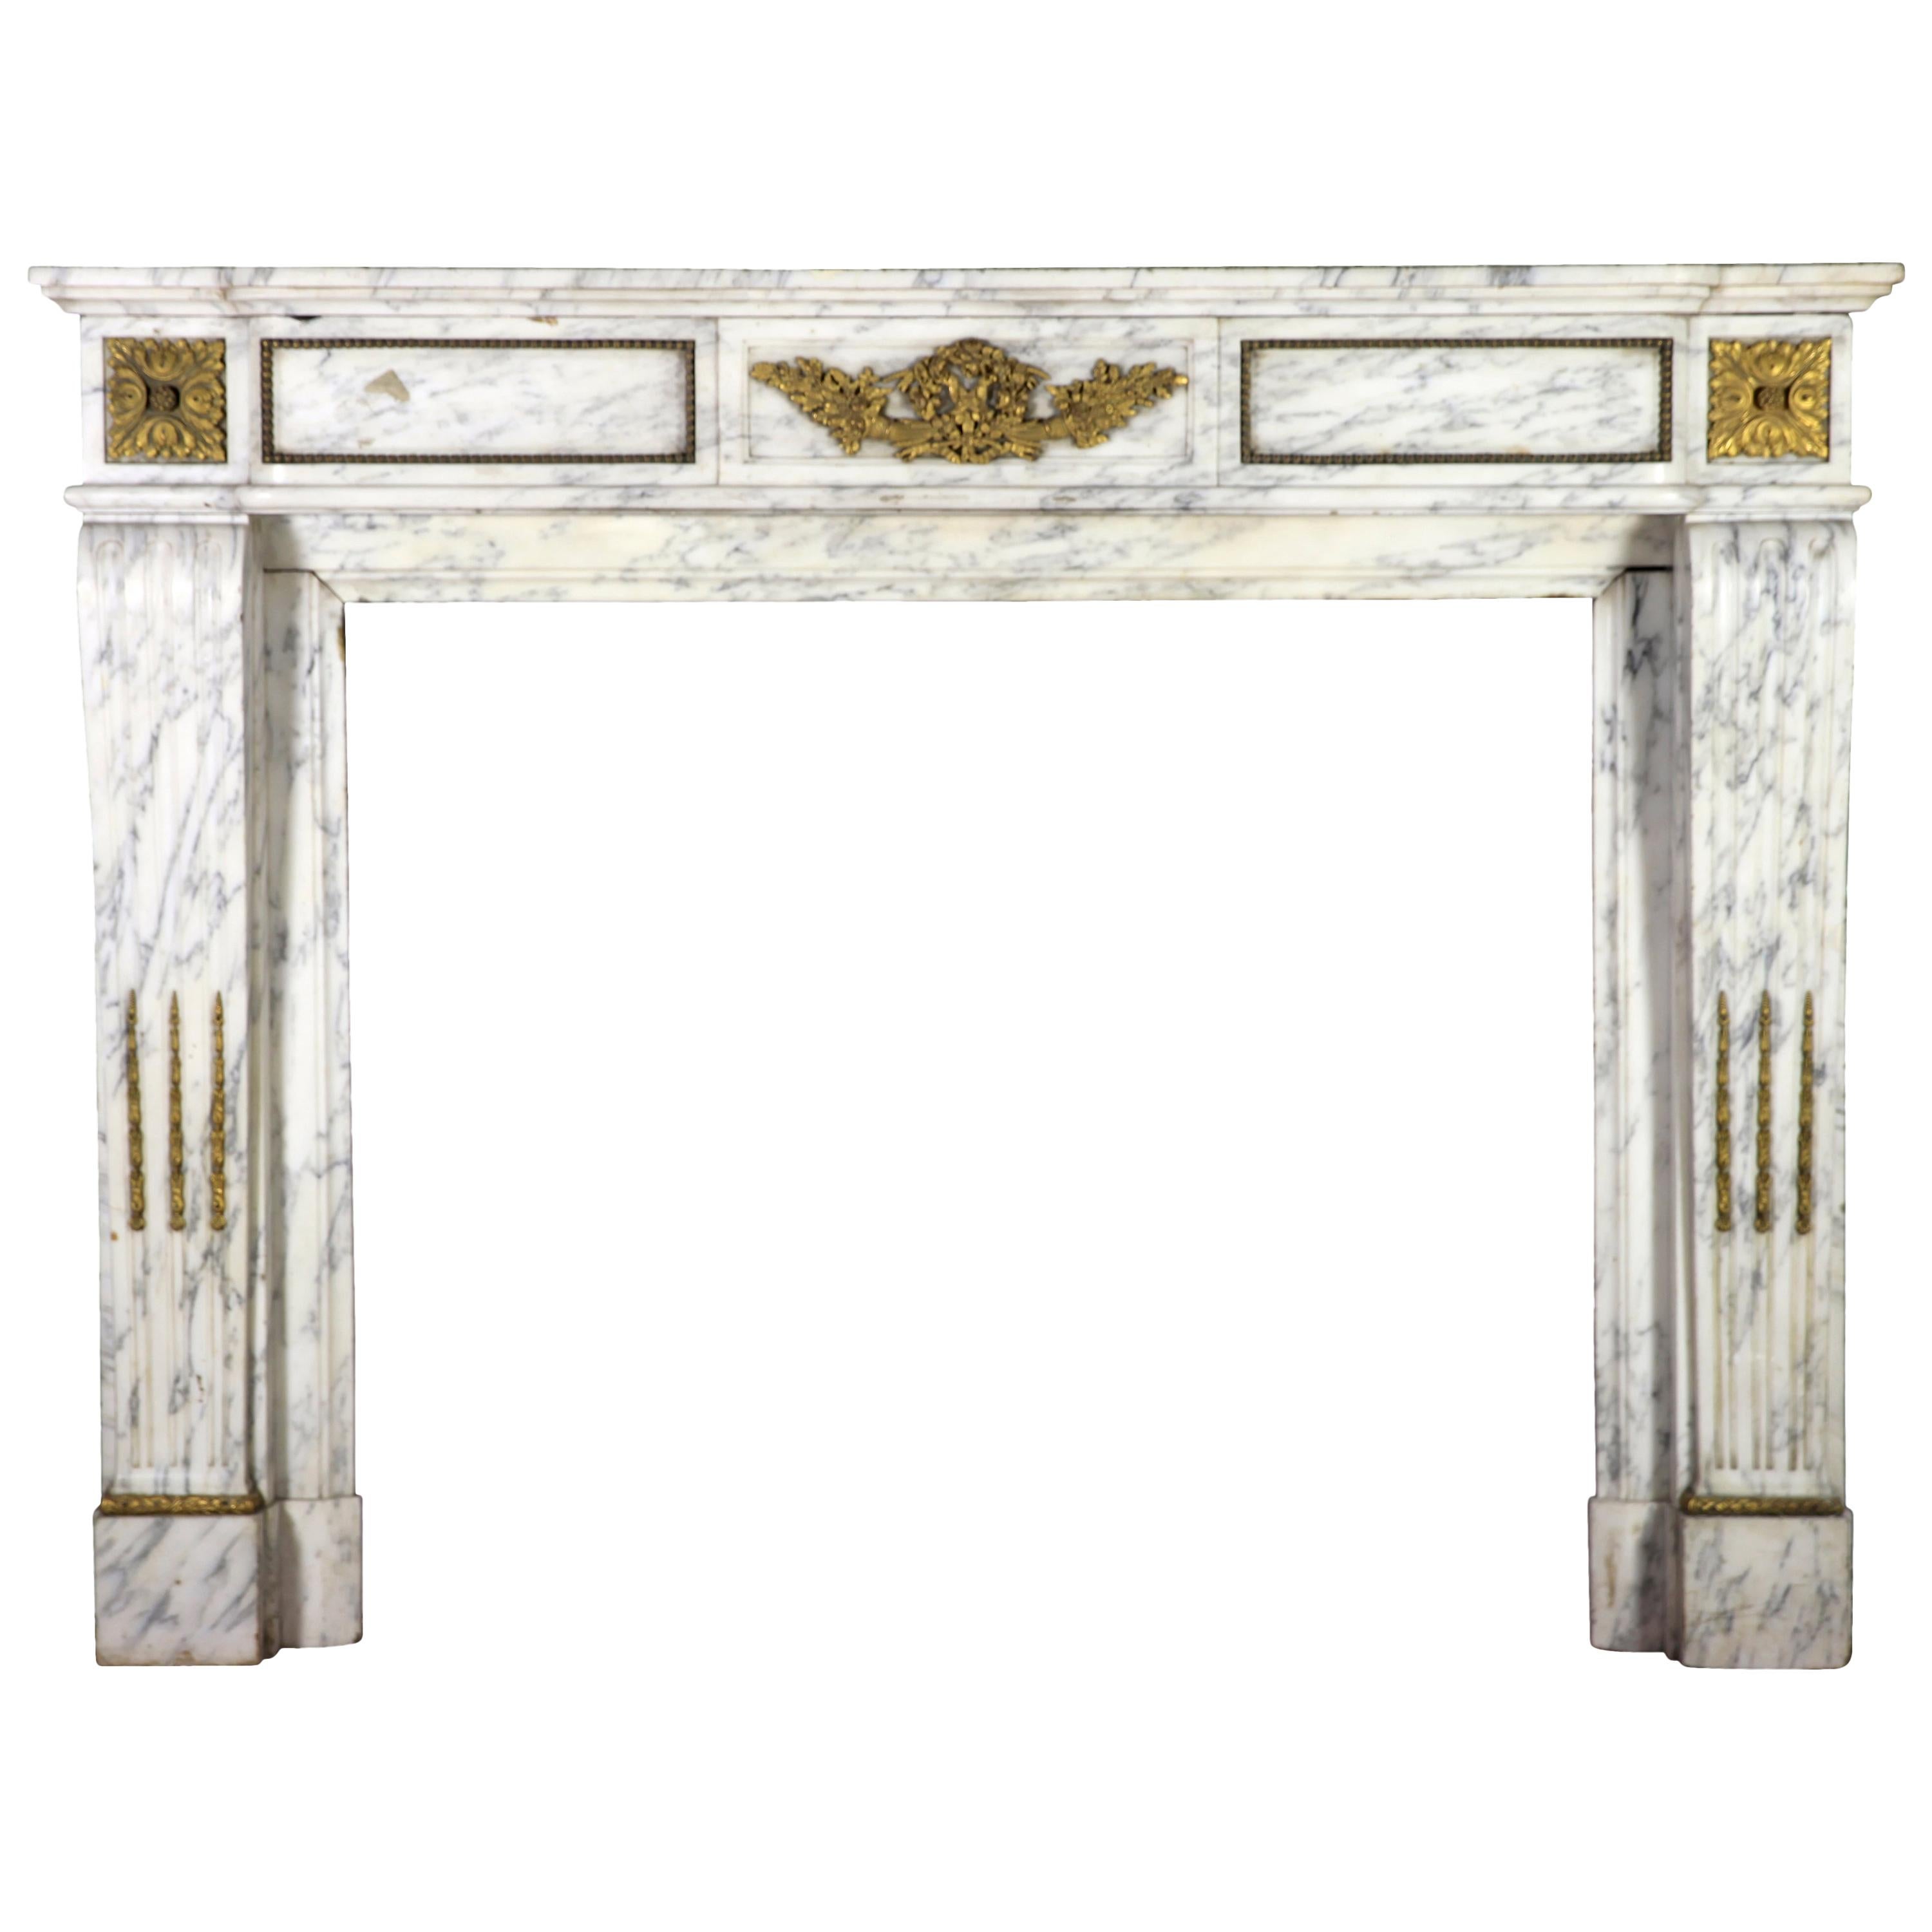 Carrara Marble French Antique Fireplace Surround in the Style of Louis XVI